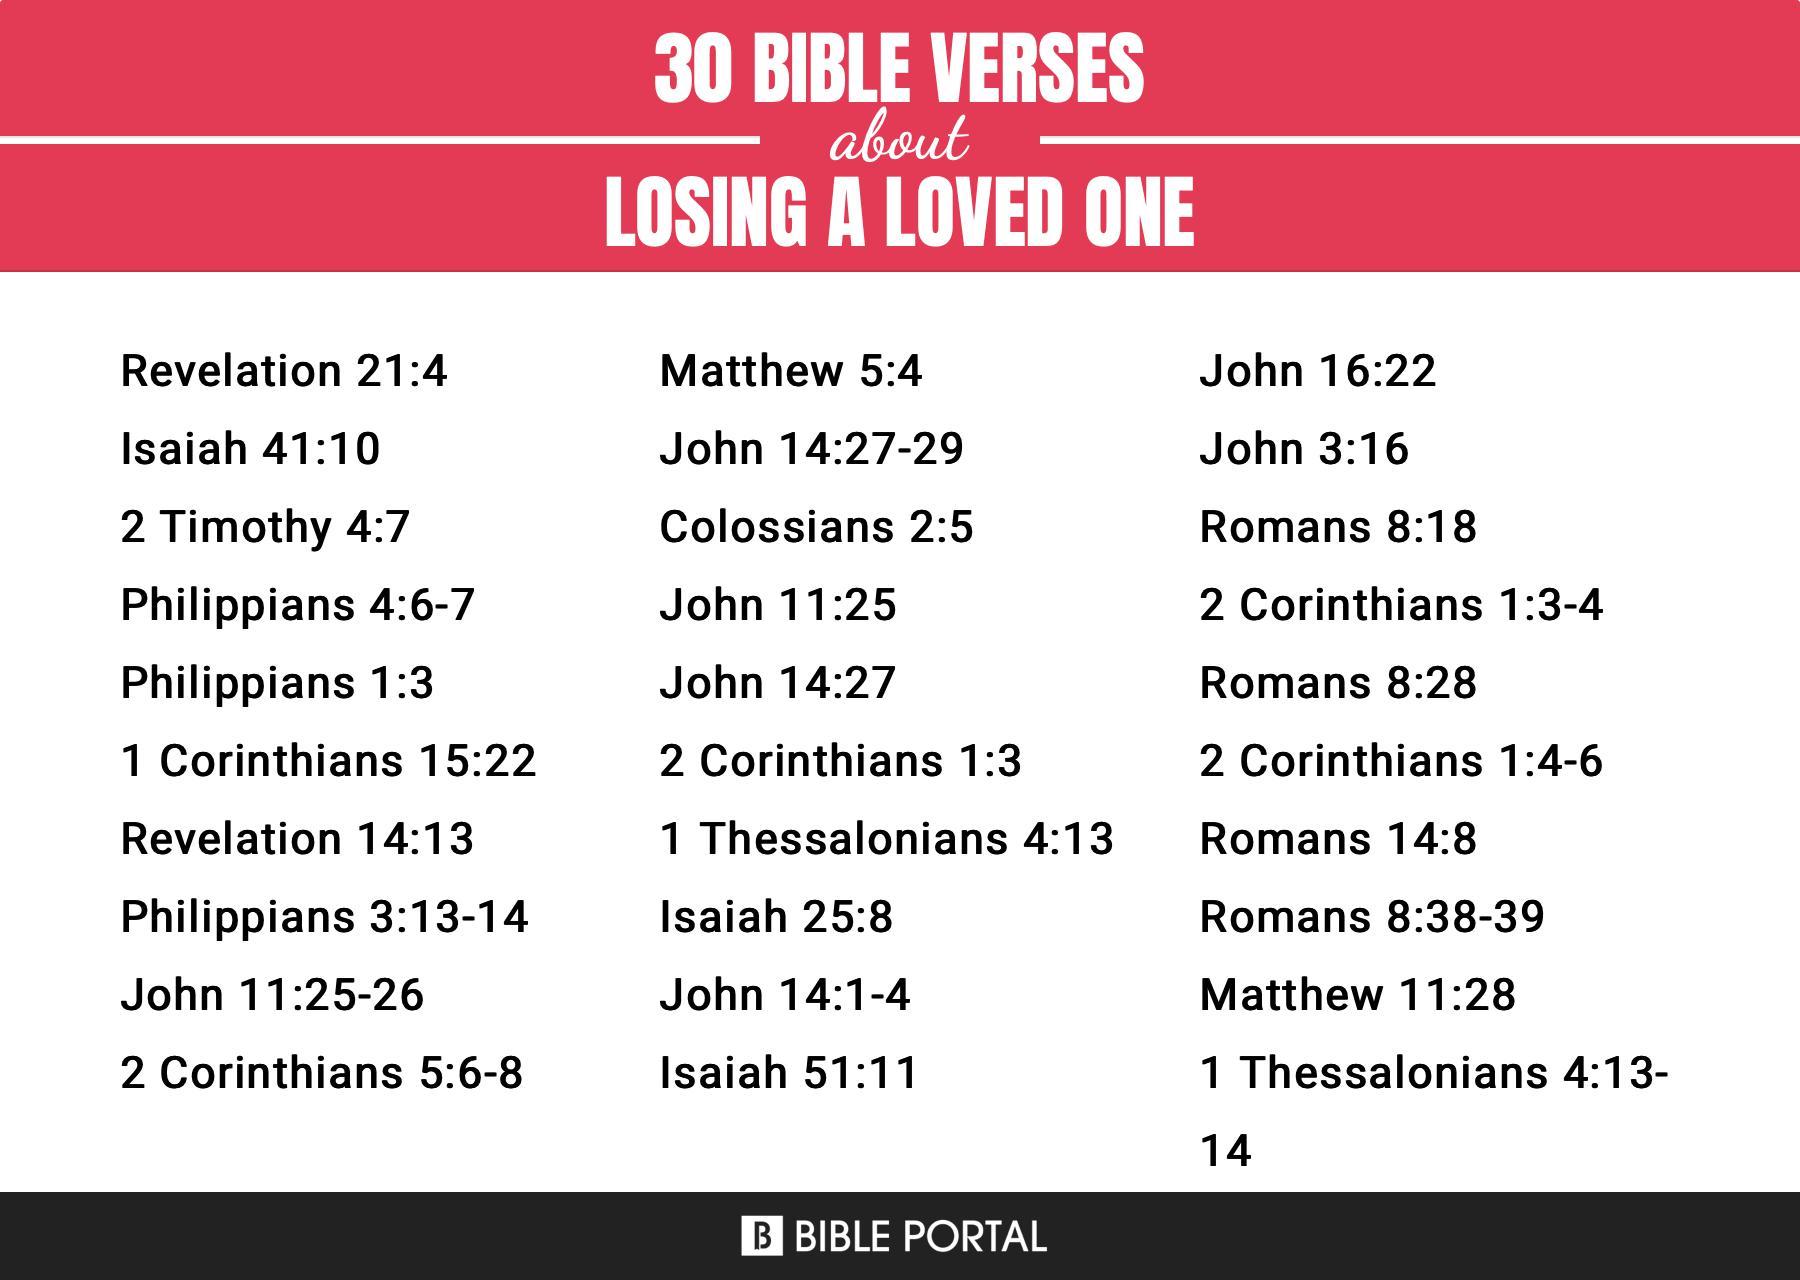 What Does the Bible Say about Losing A Loved One?